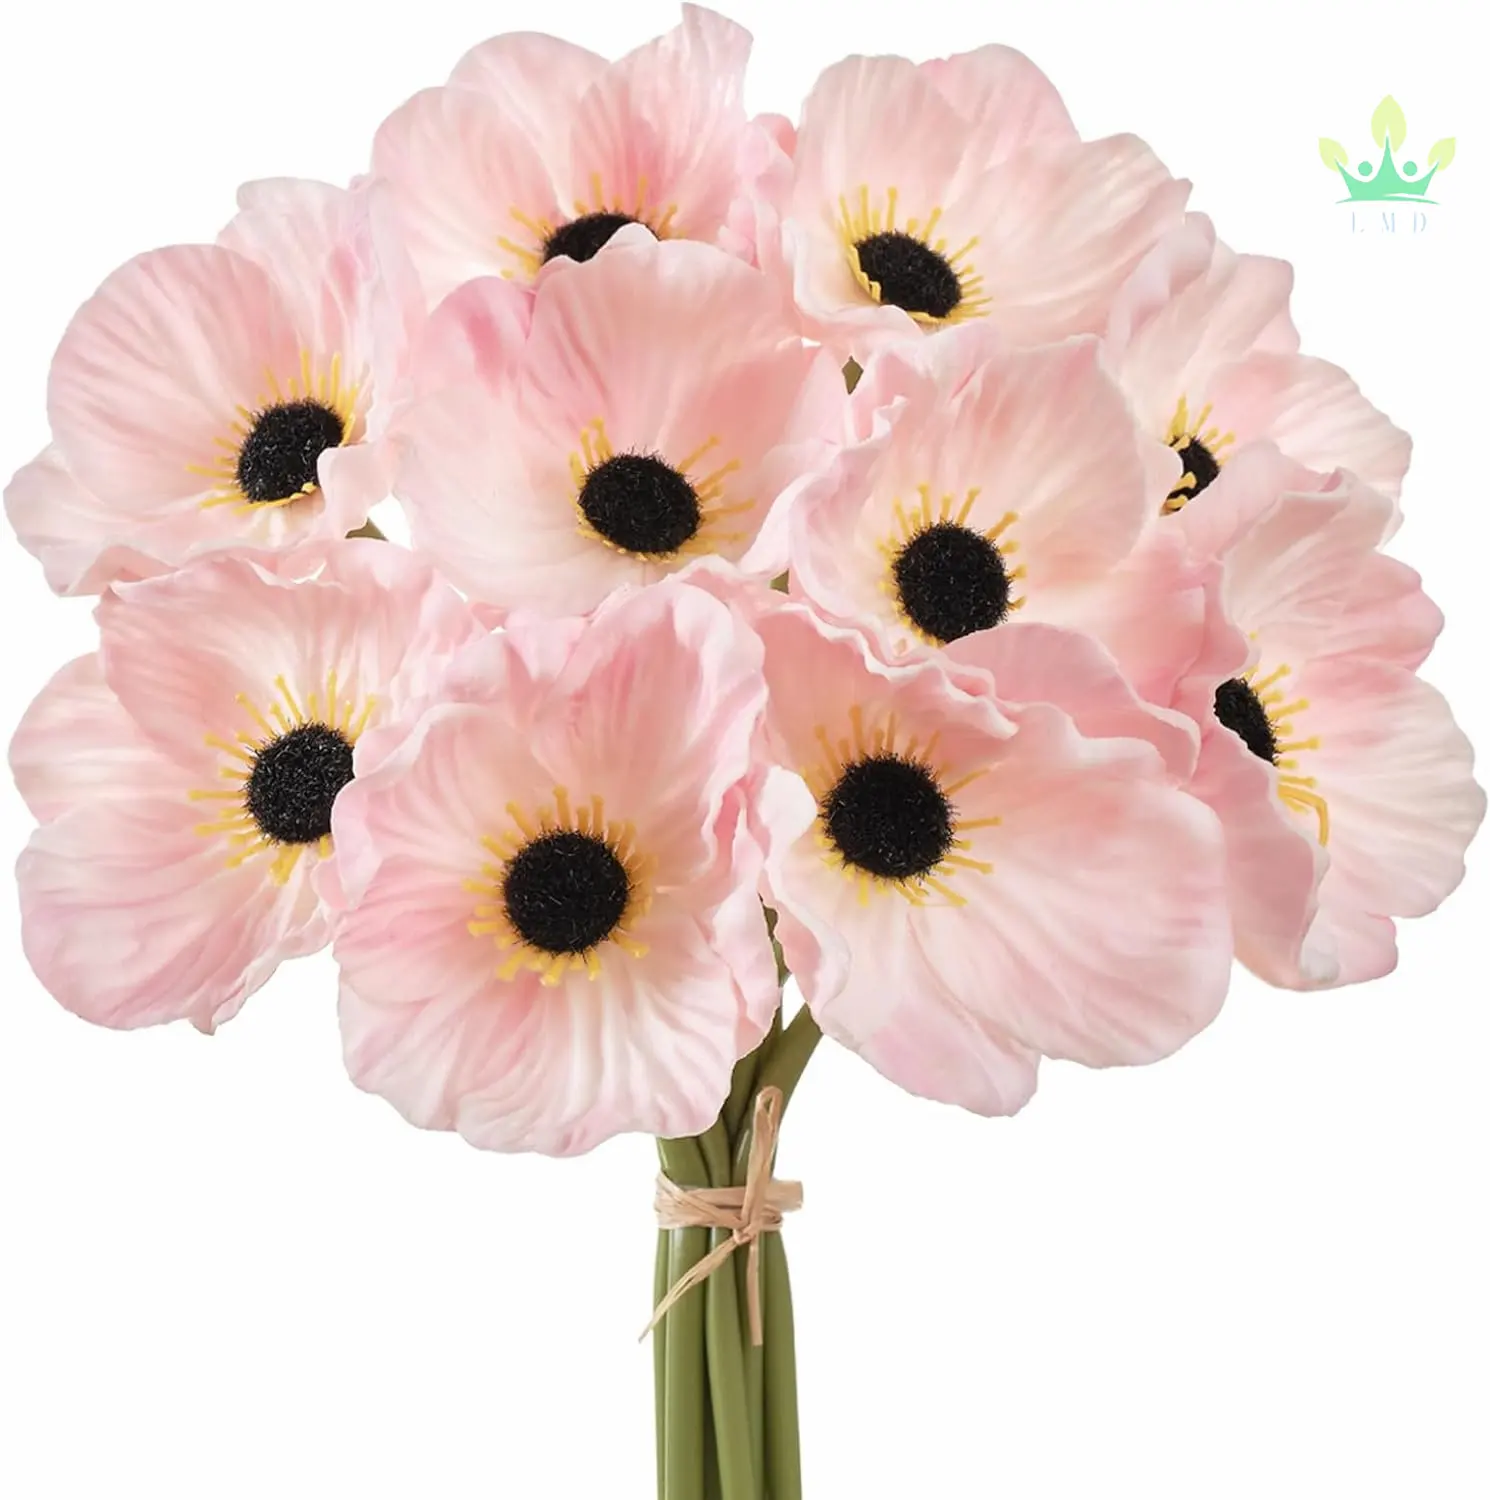 10pcs Pink Artificial Poppy Flowers for Memorial Day Veterans Day Home Kitchen Wedding Decorations